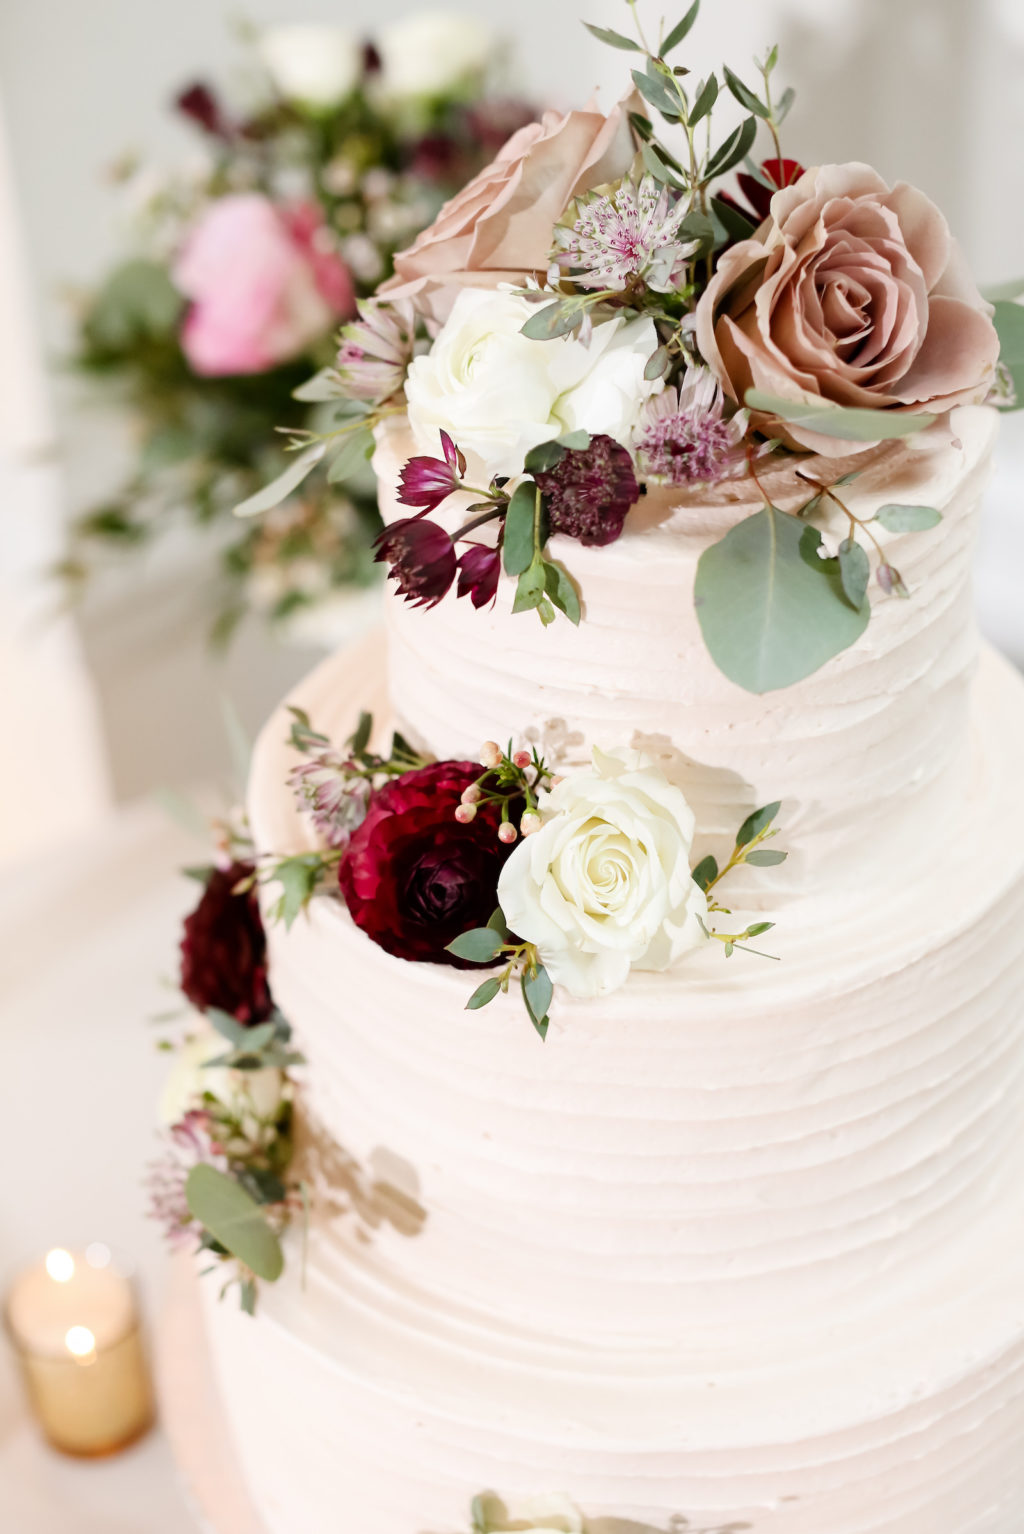 Classic Three Tier Textured Wedding Cake with Jewel Tone Flowers, Ivory, Dusty Rose Mauve, Burgundy Red Roses | Tampa Bay Florist Monarch Events and Design | Wedding Photographer Lifelong Photography Studio